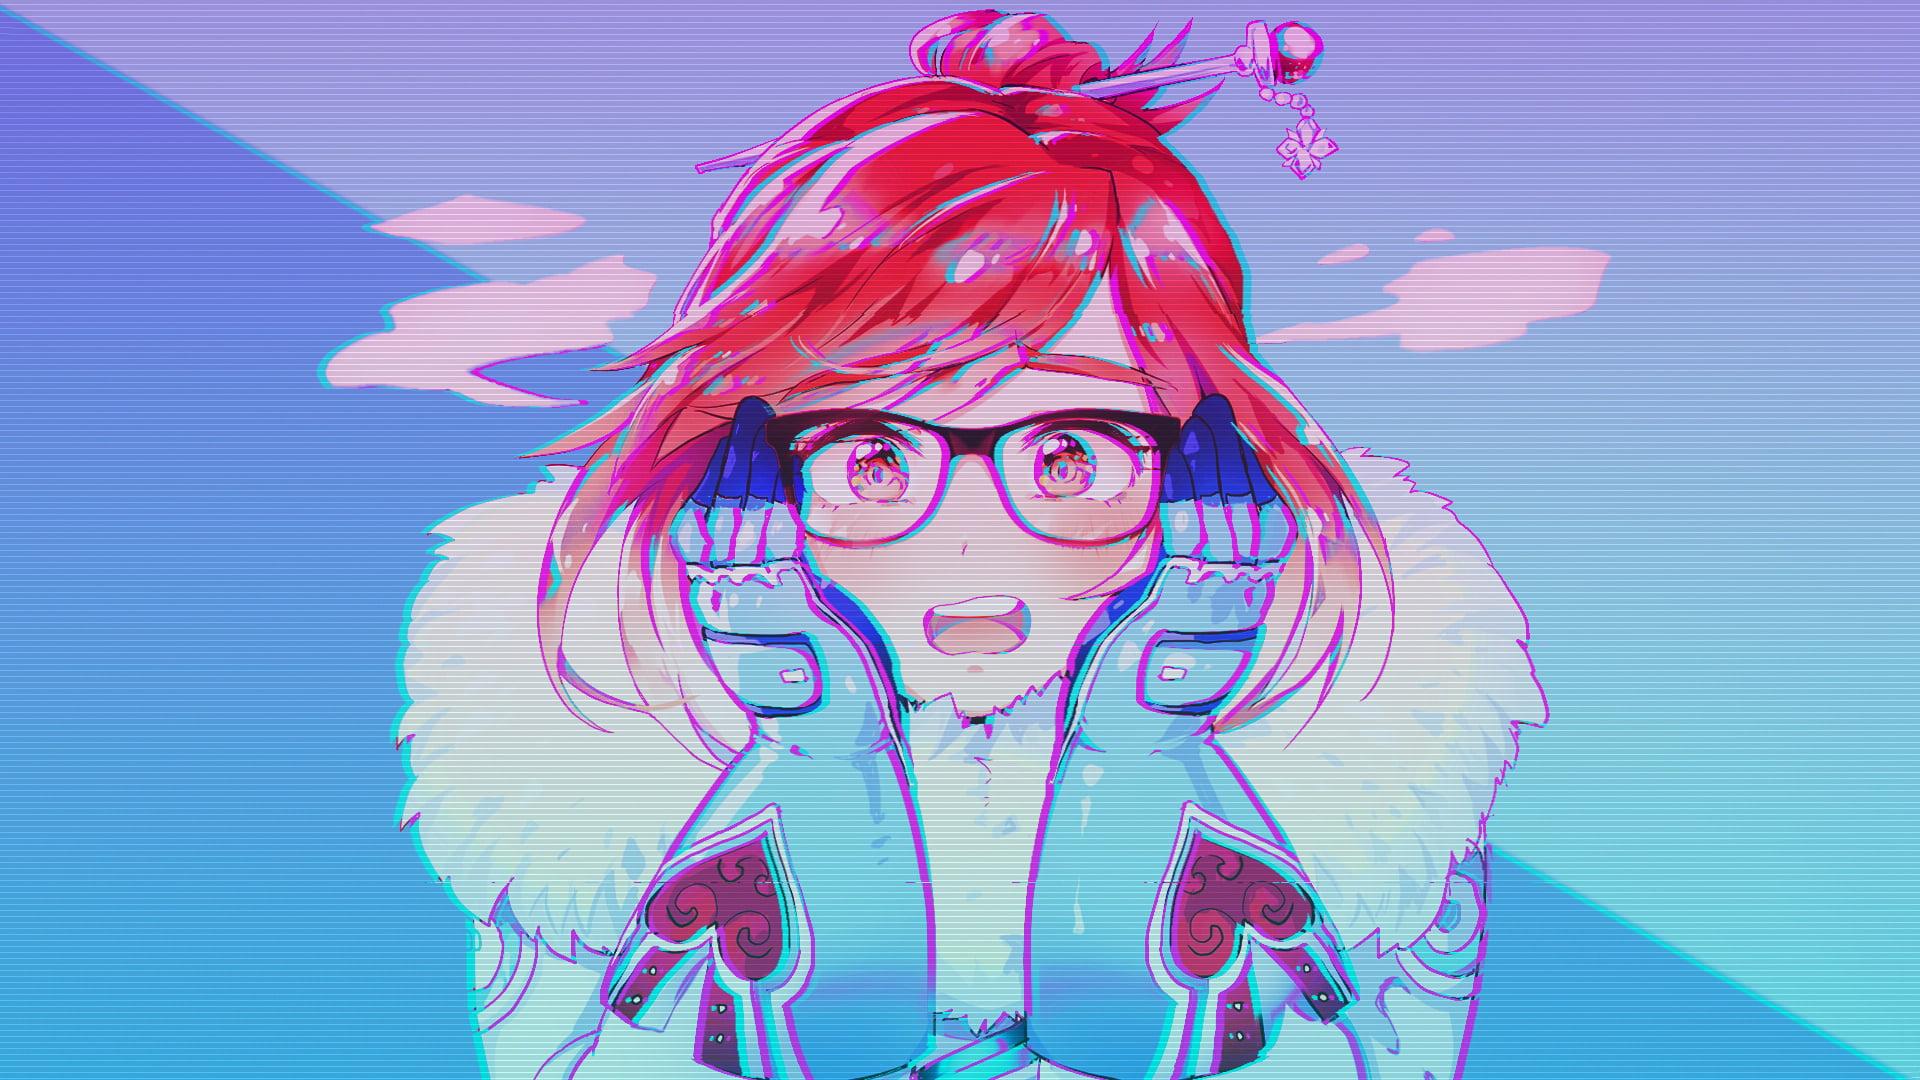 Female anime character illustration, Mei, Overwatch